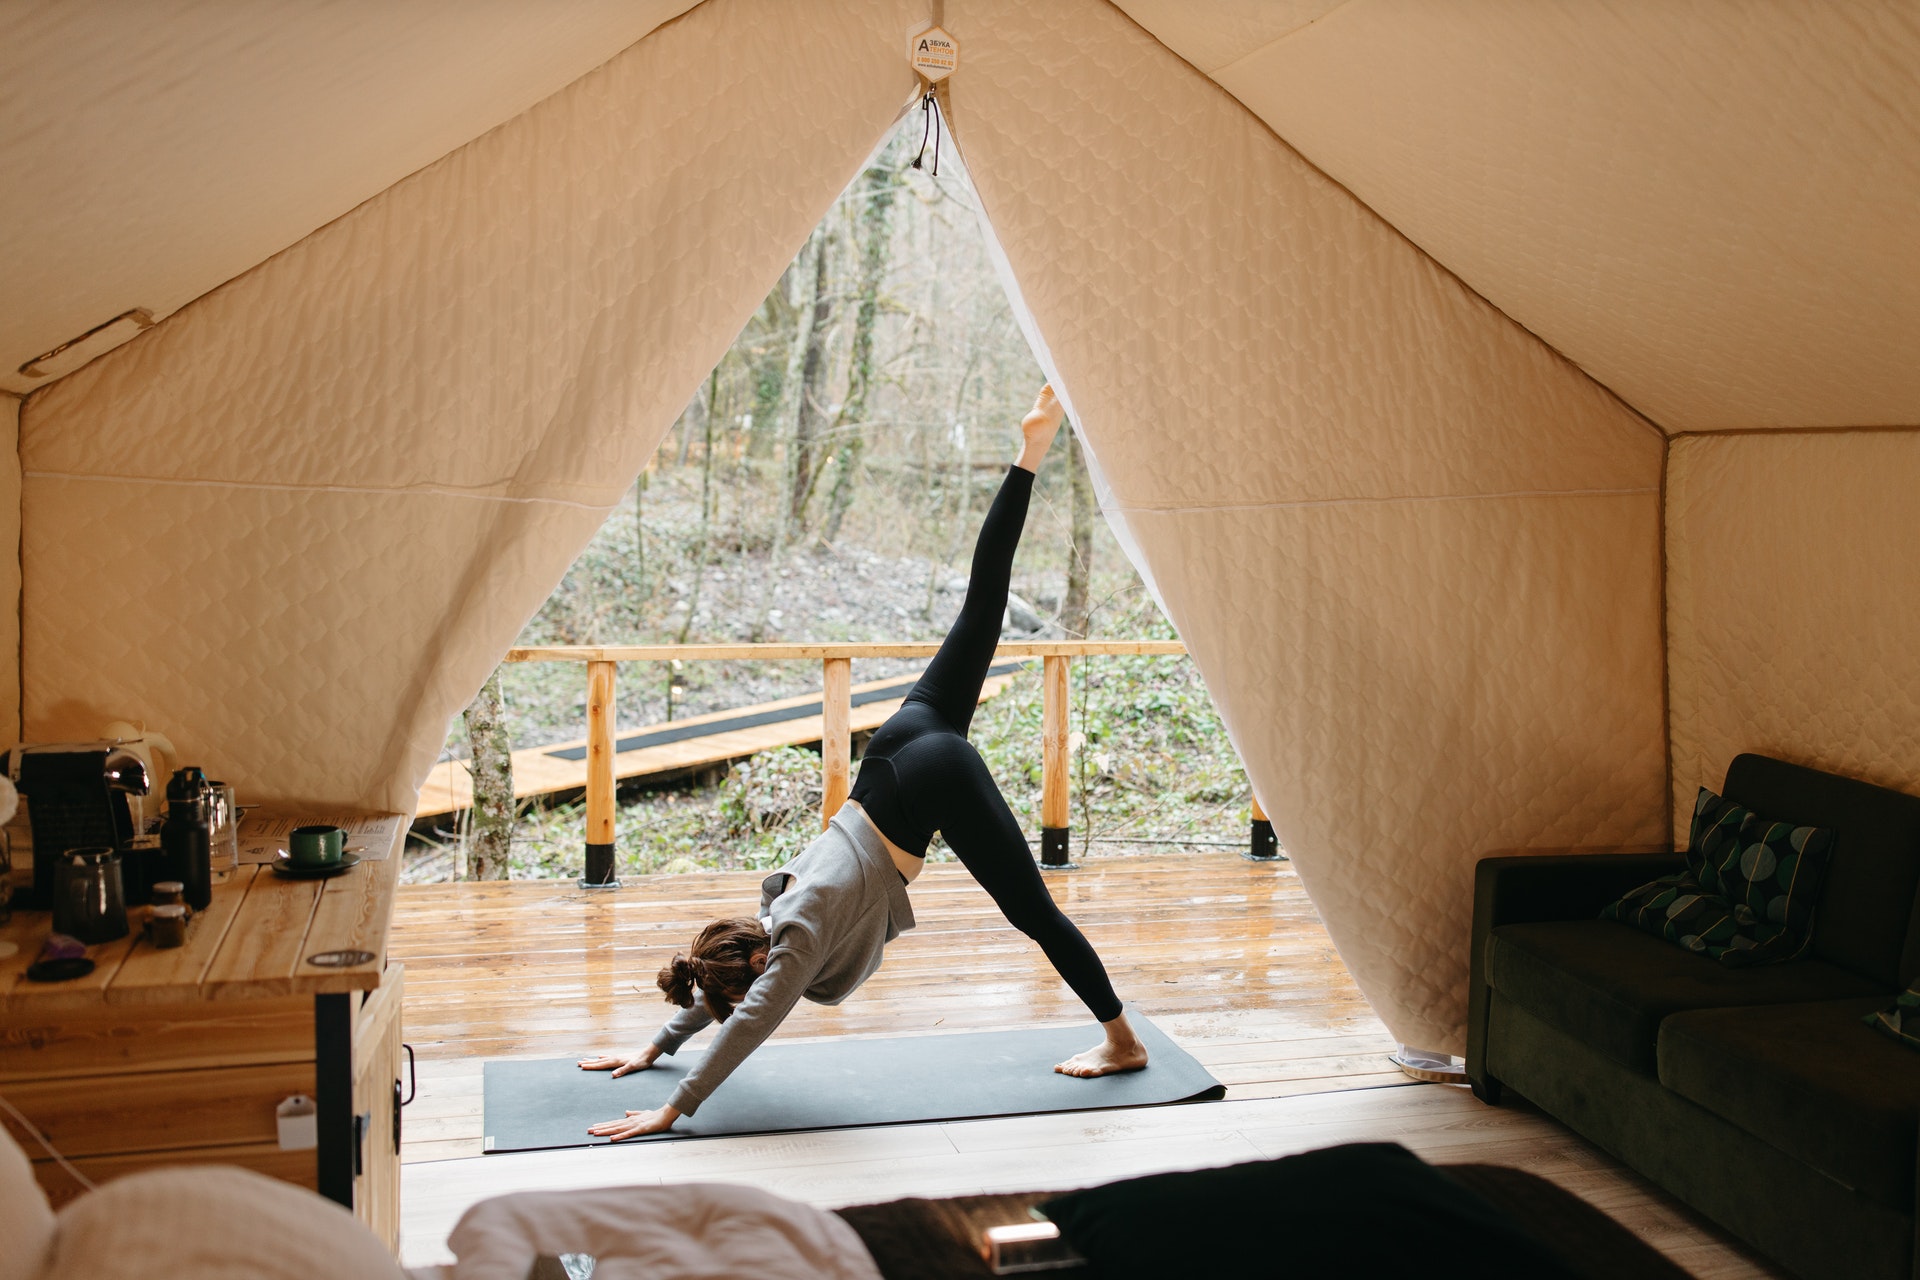 The Most Essential Glamping Gear for Beginners